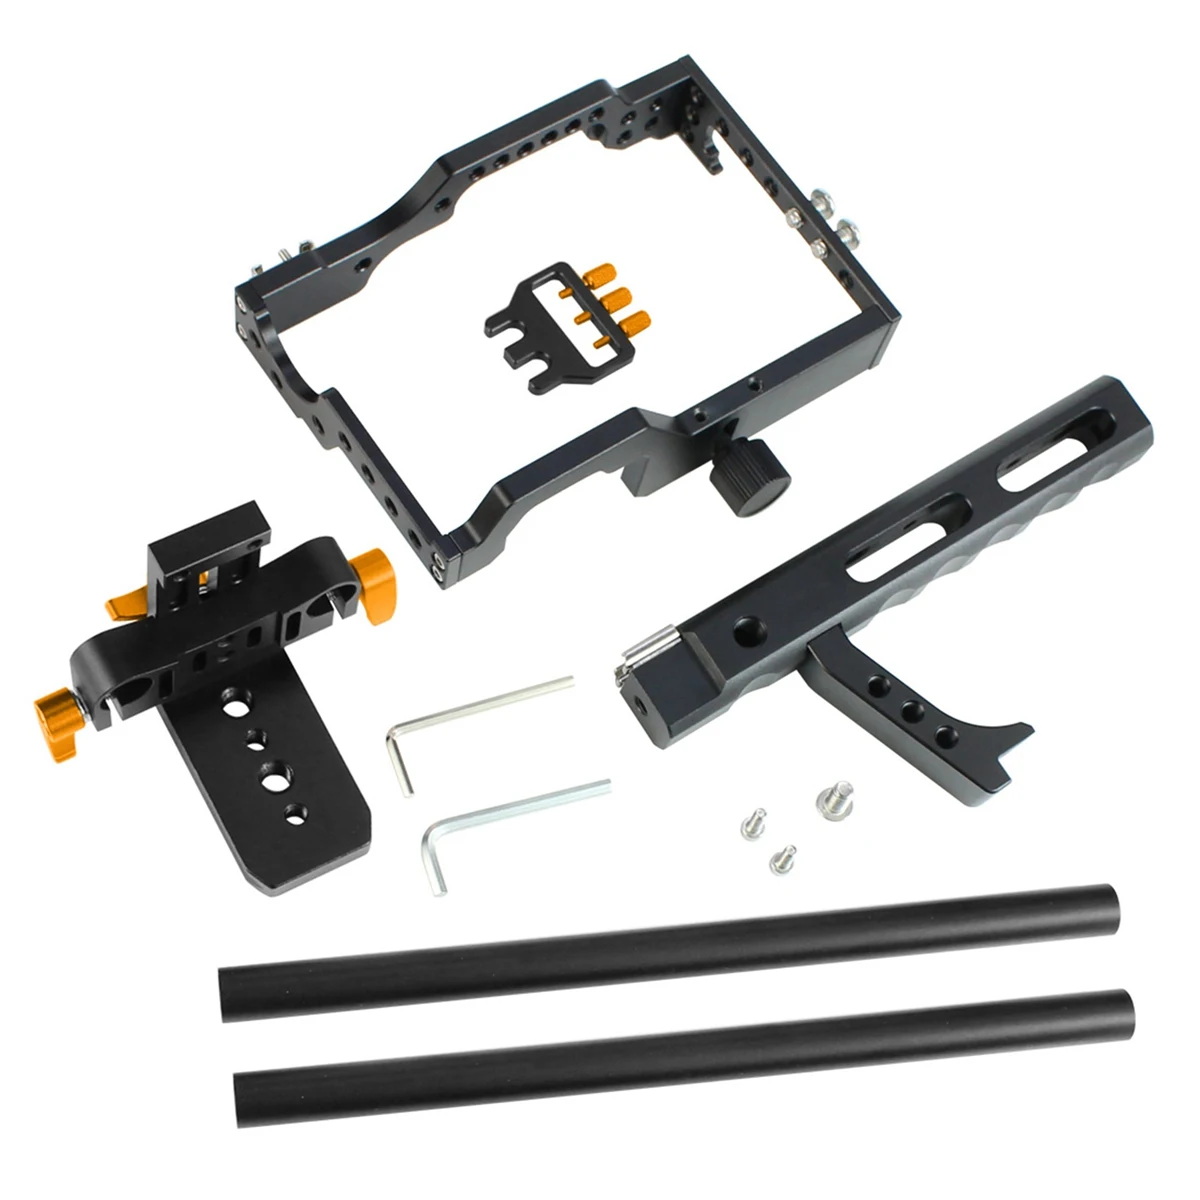 

C5 Camera Cage Rod Rail Rig Follow Focus Support Handle Grip Stabilizer for Sony A7II A7R A6300 A6500 A6000(Orange)